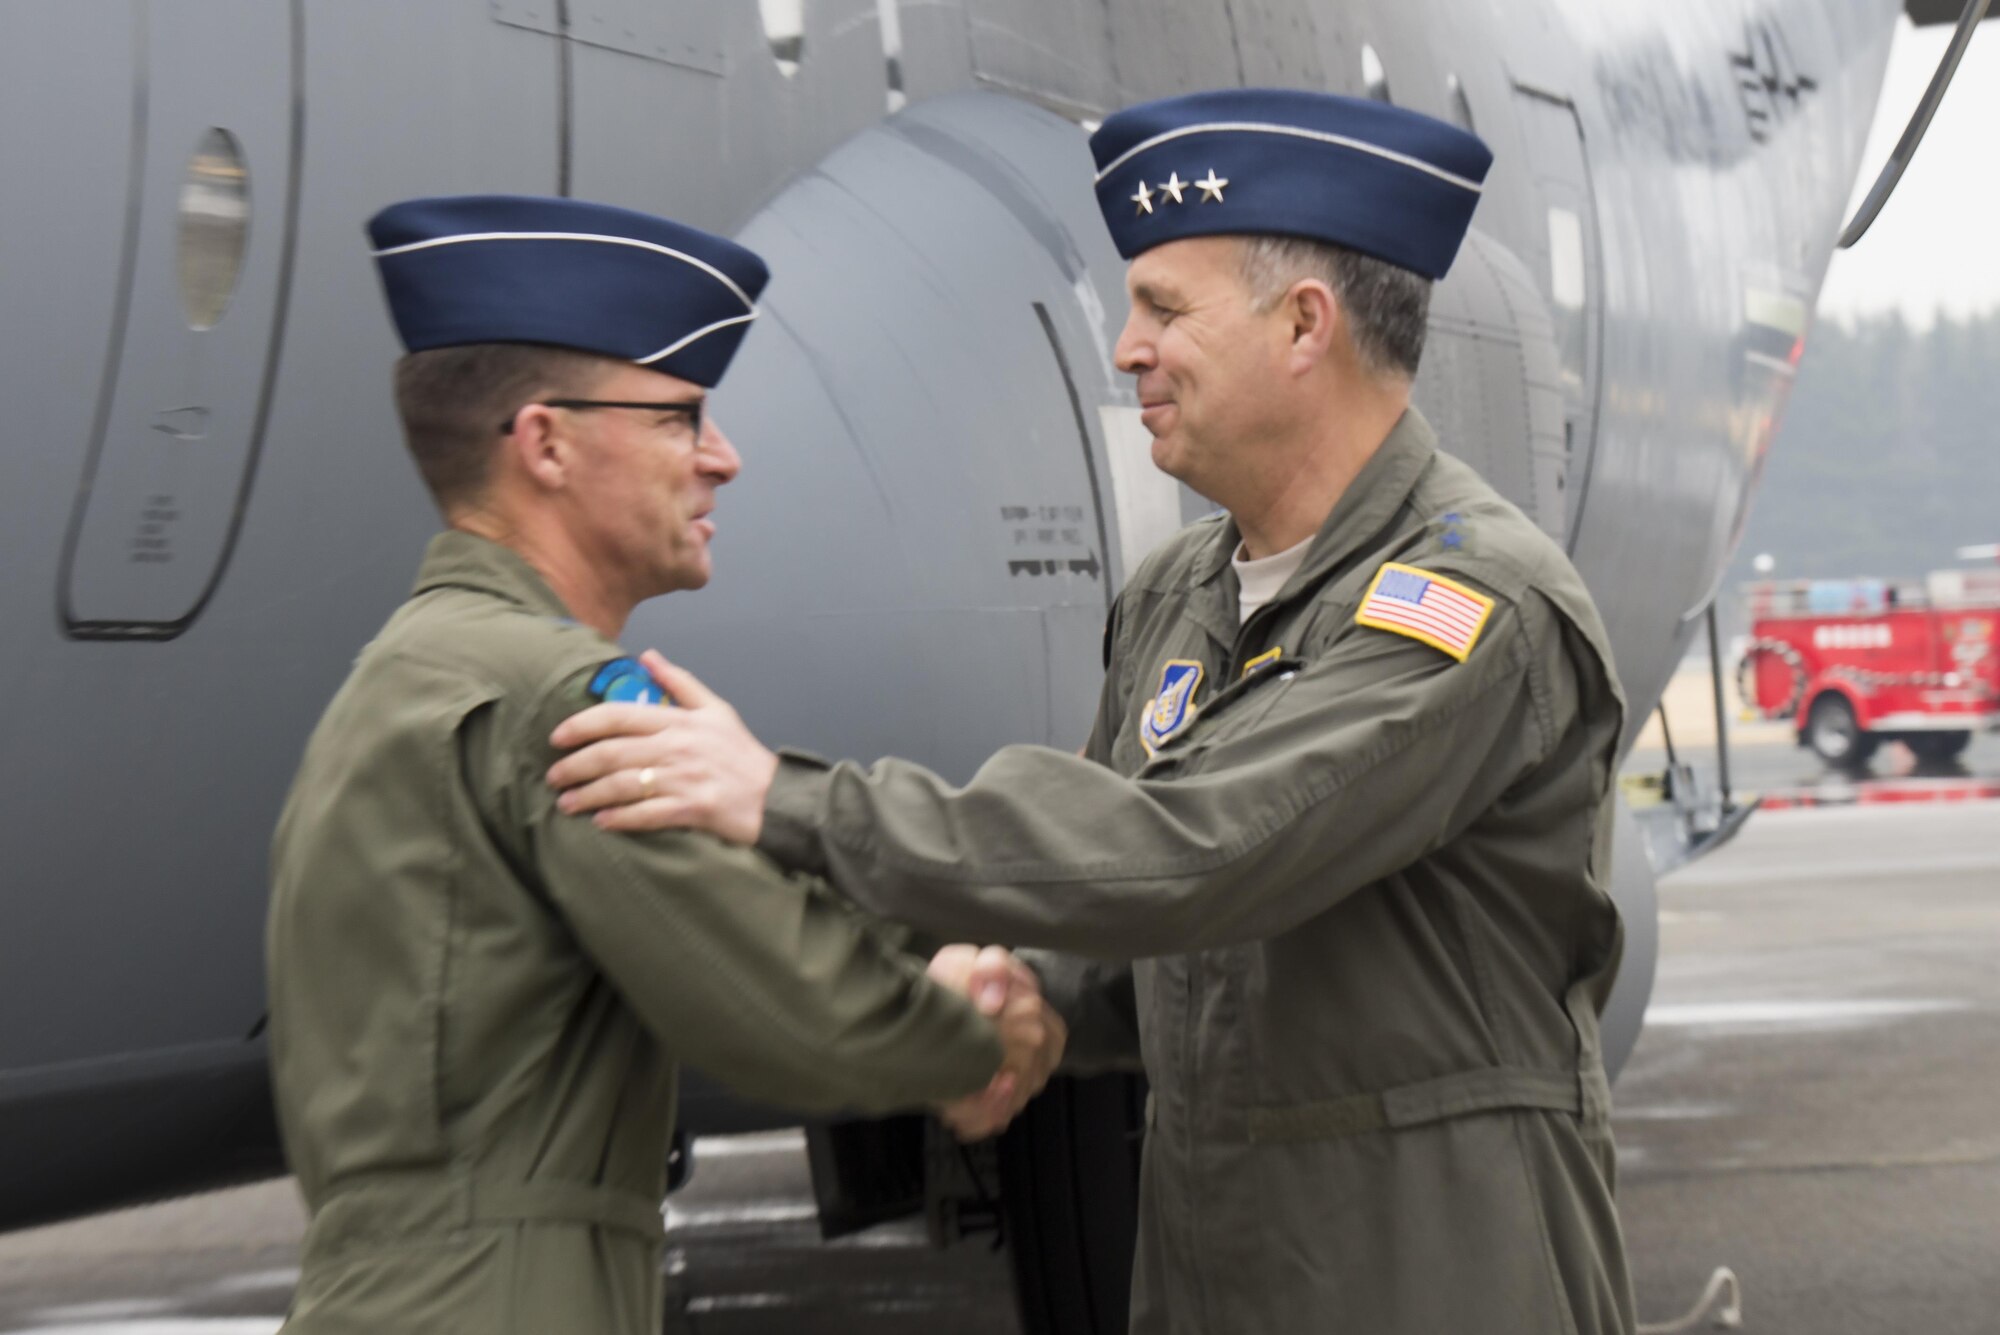 Lt. Gen. Jerry Martinez, U.S. Forces Japan and 5th Air Force commander, right, greets Maj. Gen. Mark Dillon, Pacific Air Forces vice-commander, left, during a ceremony held to celebrate the arrival of the first C-130J Super Hercules assigned to Yokota Air Base, Japan, Mar. 6, 2017. The aircraft provides significant performance improvements and added operational capabilities that translate directly into increased effectiveness. (U.S. Air Force photo by Senior Airman David C. Danford)